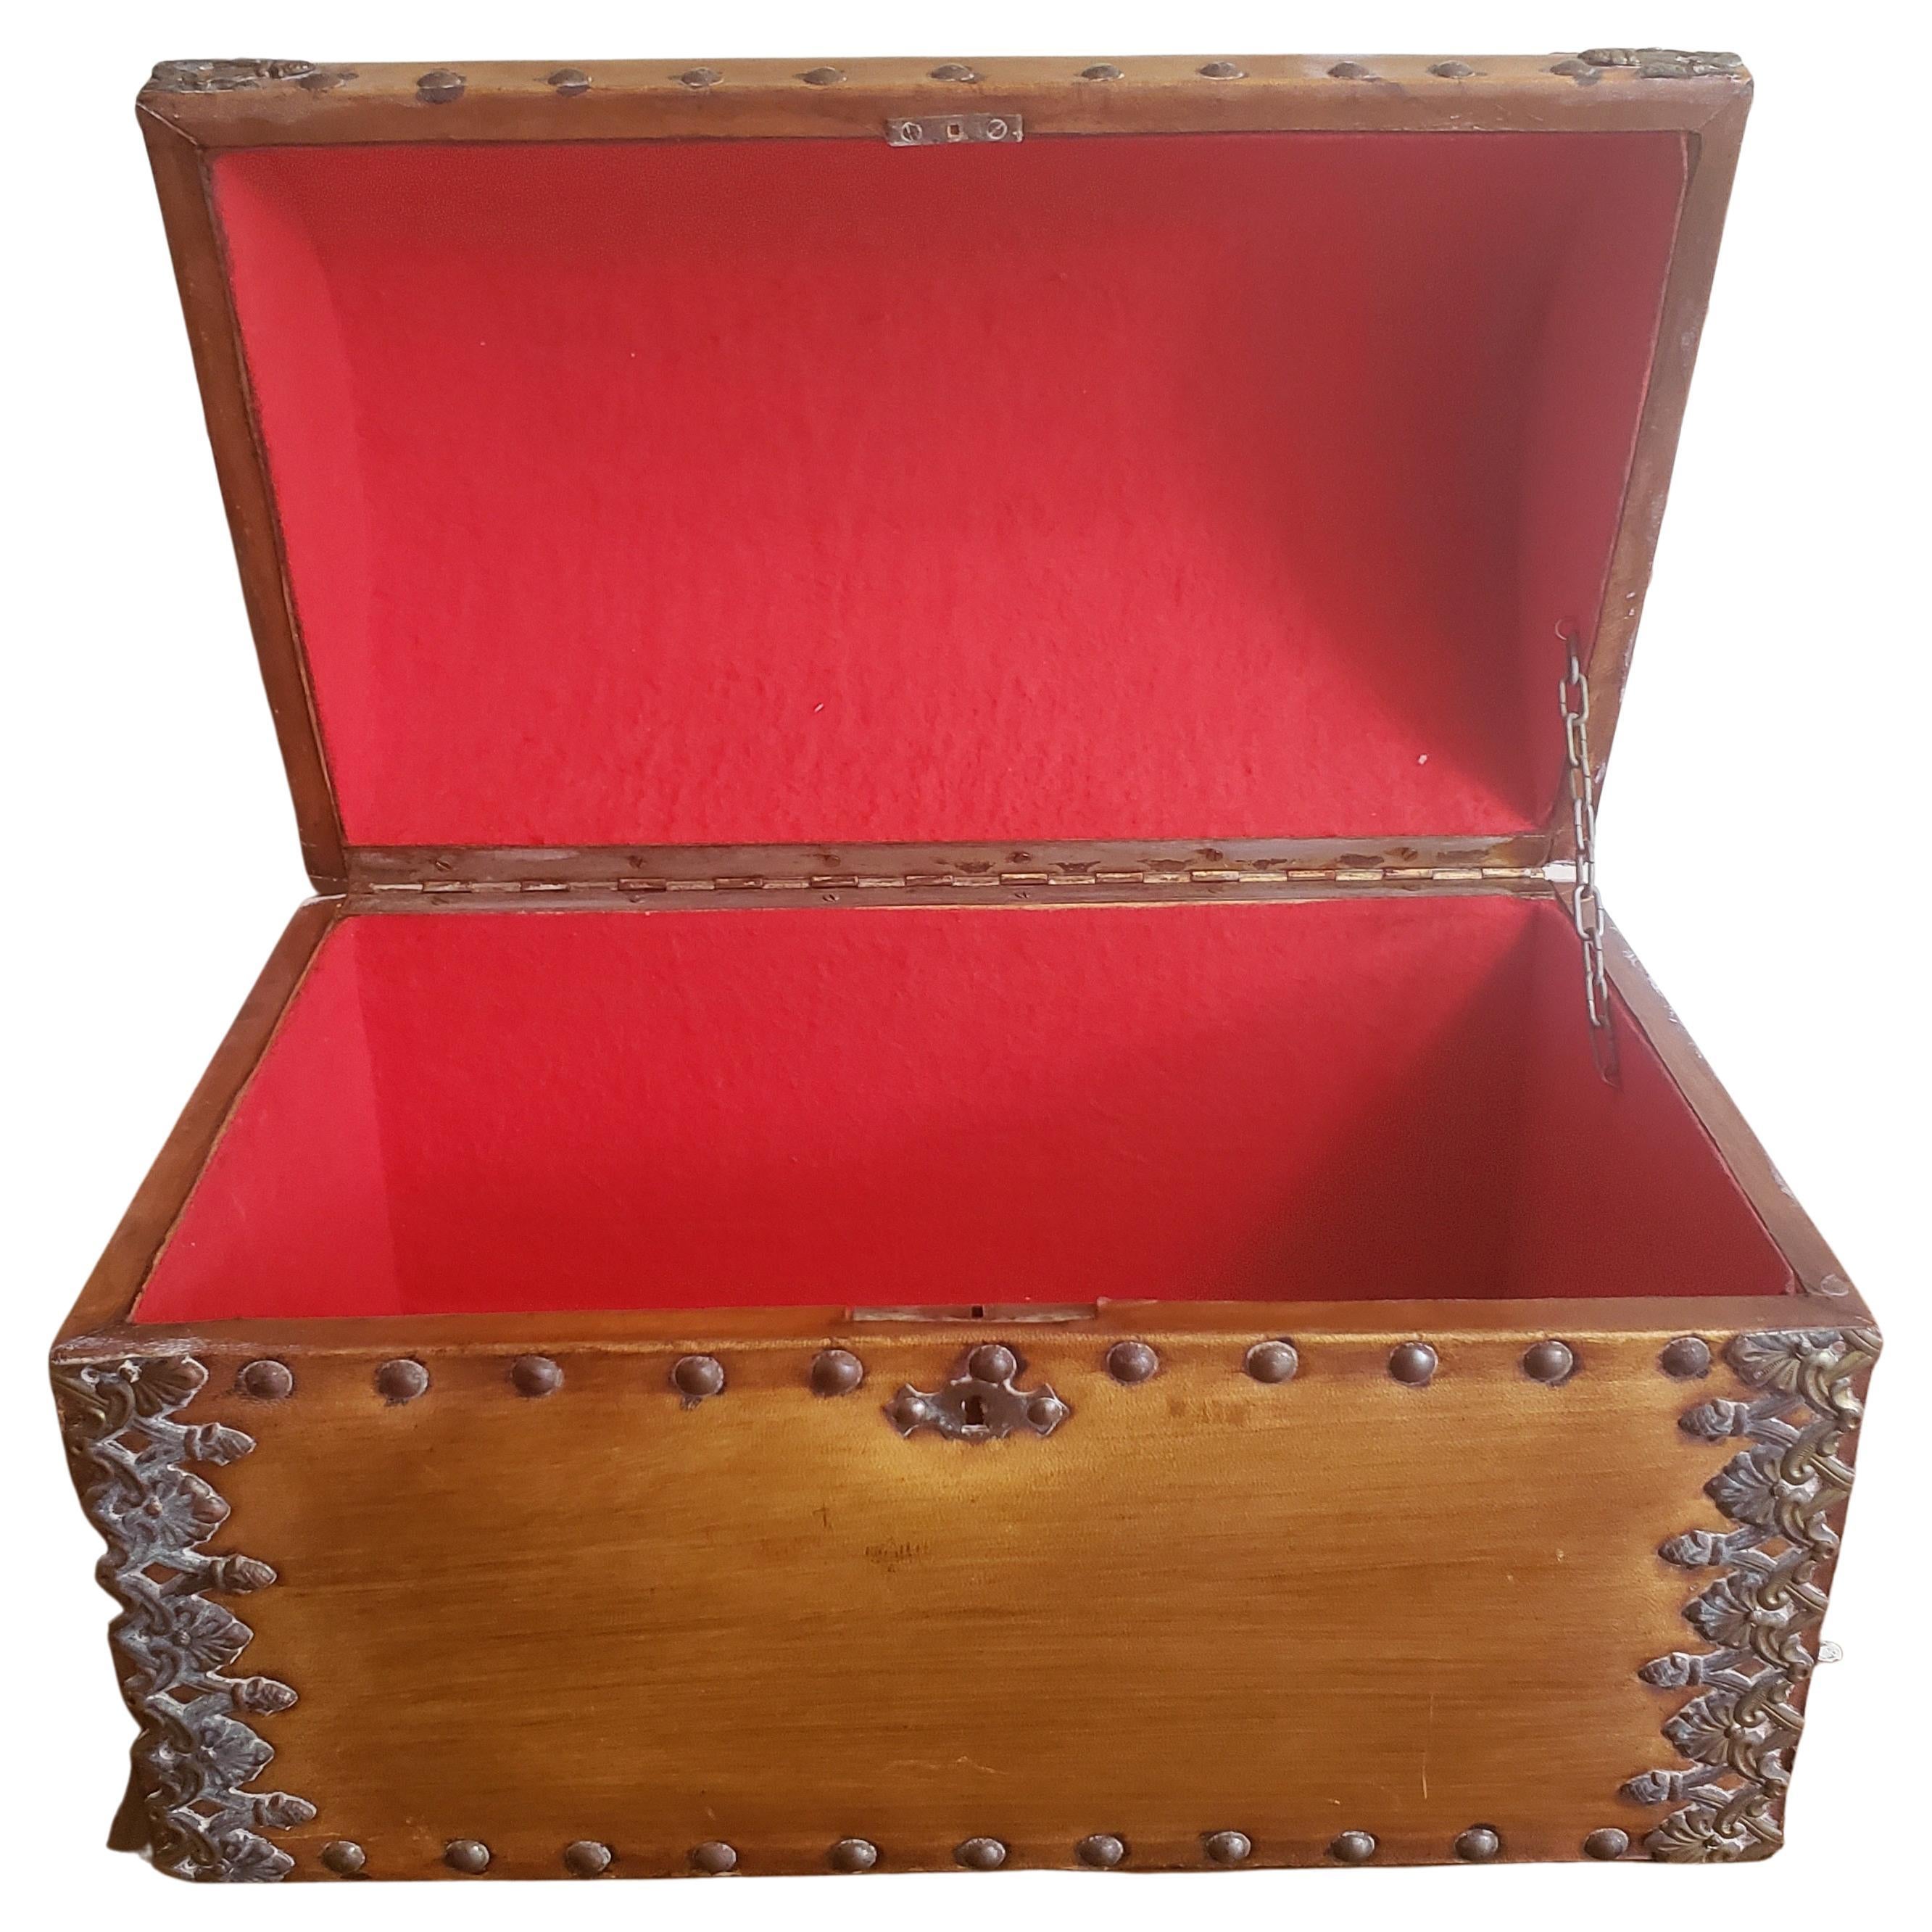 Other 20th Century Spanish Colonial Style  Ornate Leather & Nail Heads Document Chest For Sale